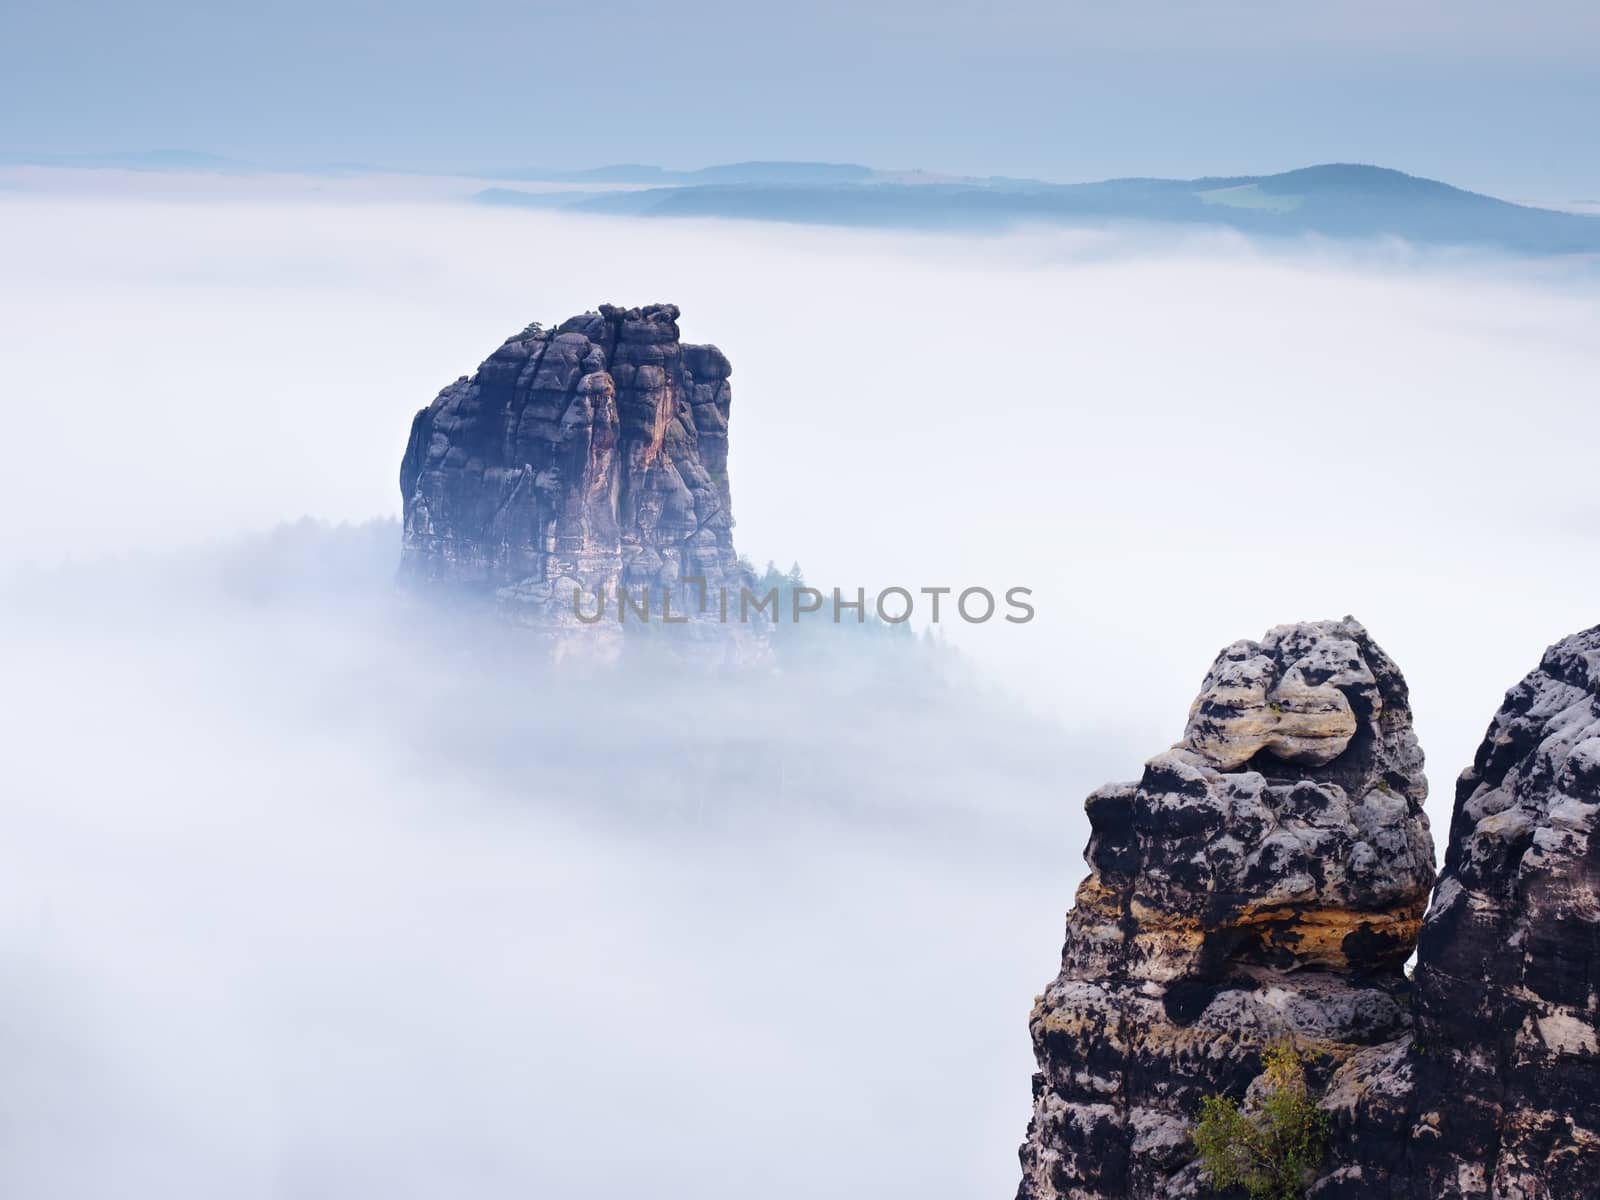 Sharp sandstone rock empire sticking out from heavy fog. Deep misty valley full of creamy mist. Popular climbers resort in autumn look